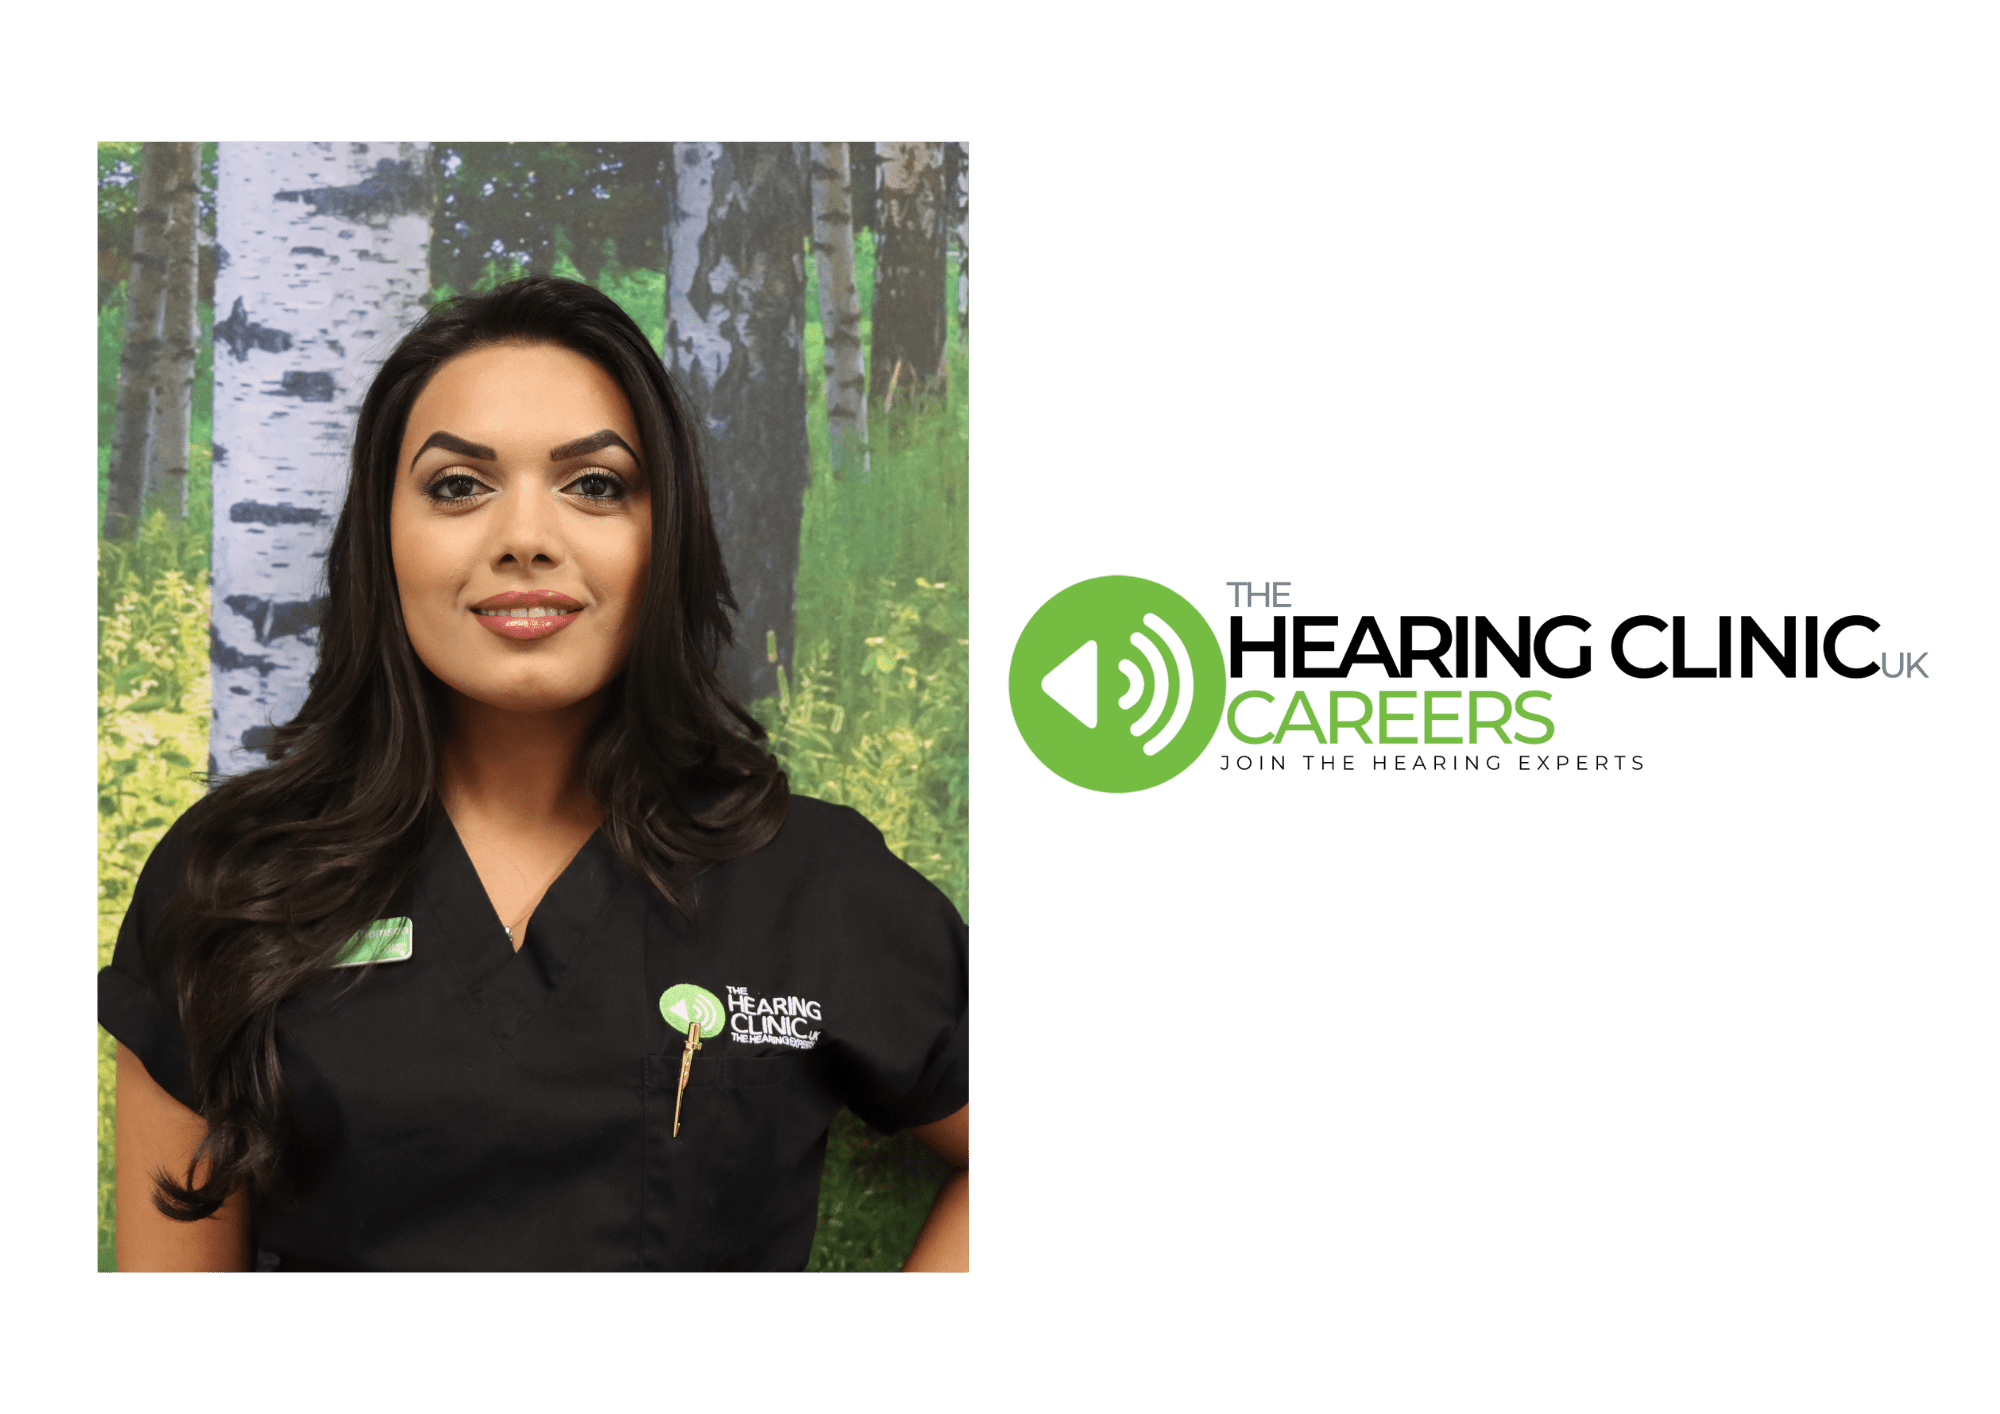 Clinician at The Hearing Clinic UK